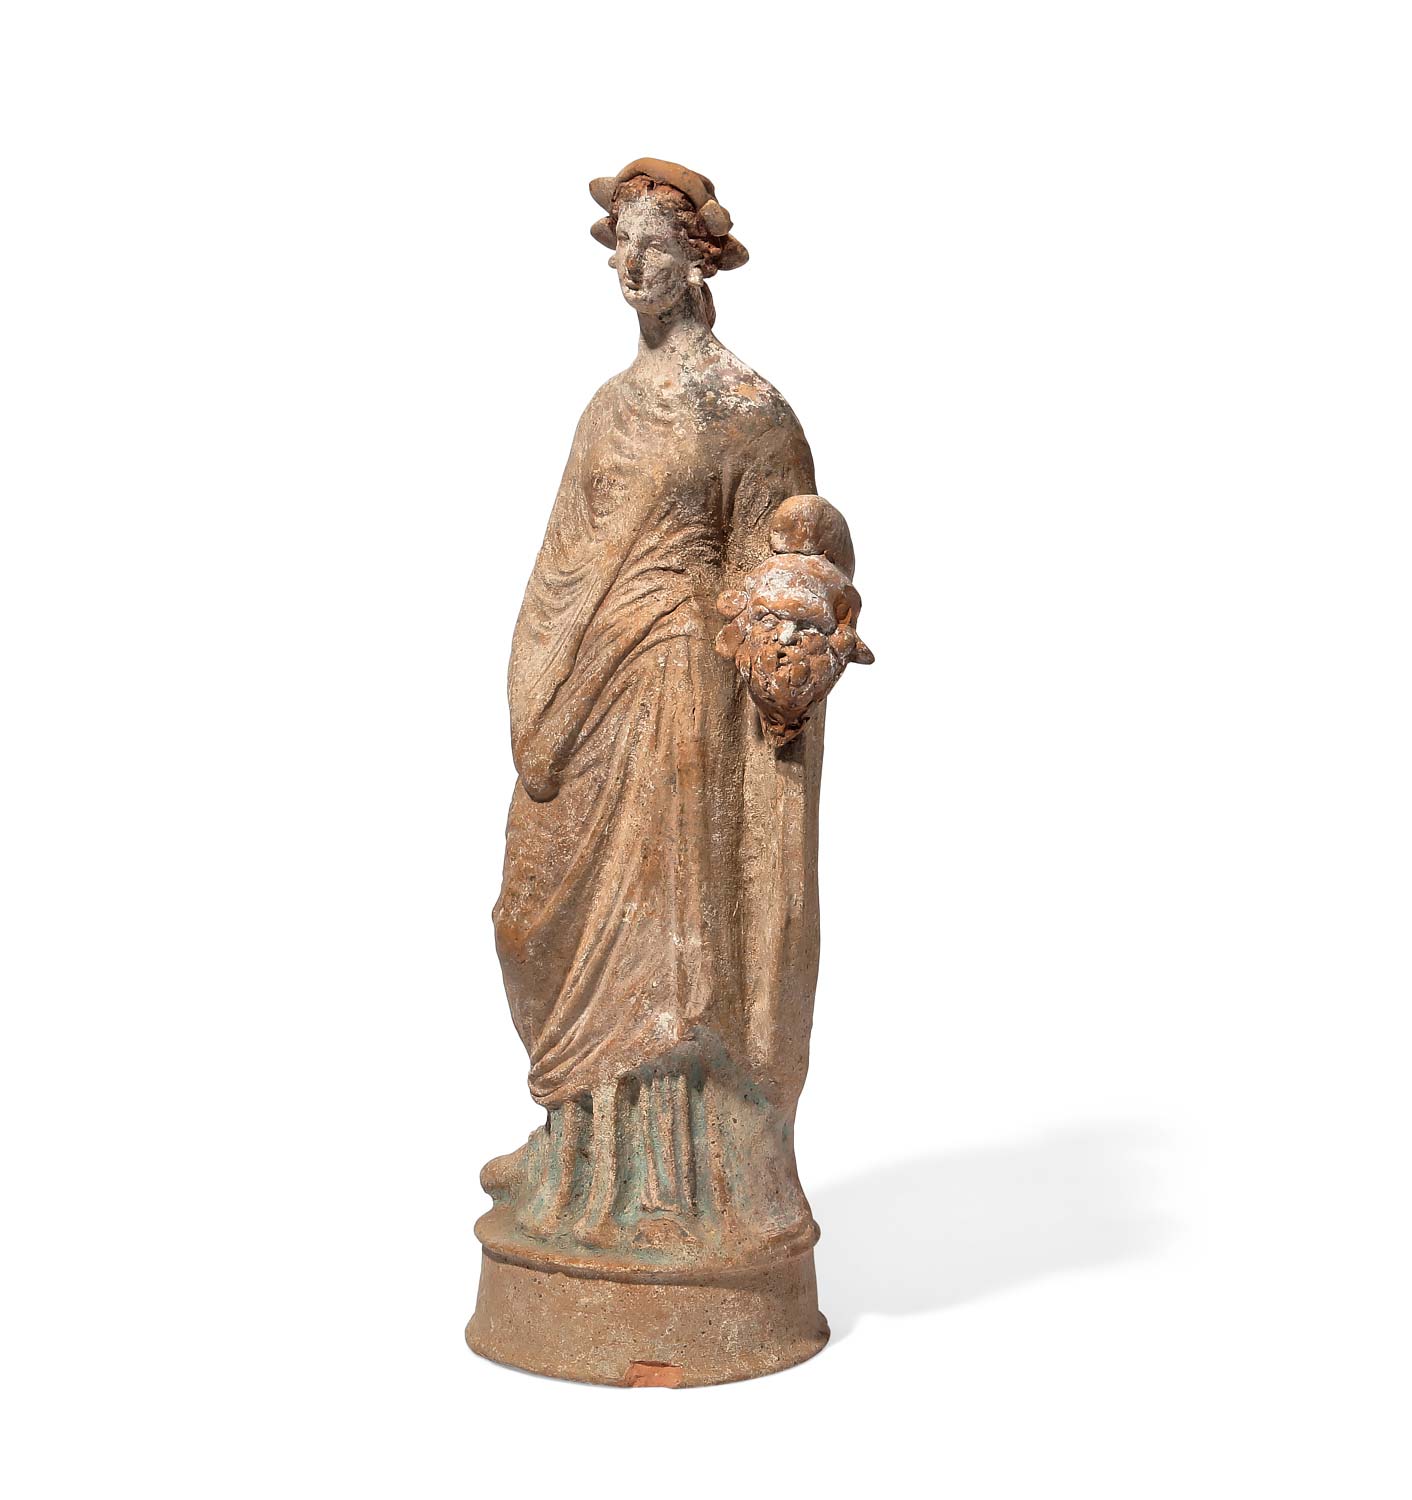 Canosan terracotta model of Thalia, Muse of Comedy, South Italy, $1,200-$1,800. Image courtesy Andrew Jones Auctions